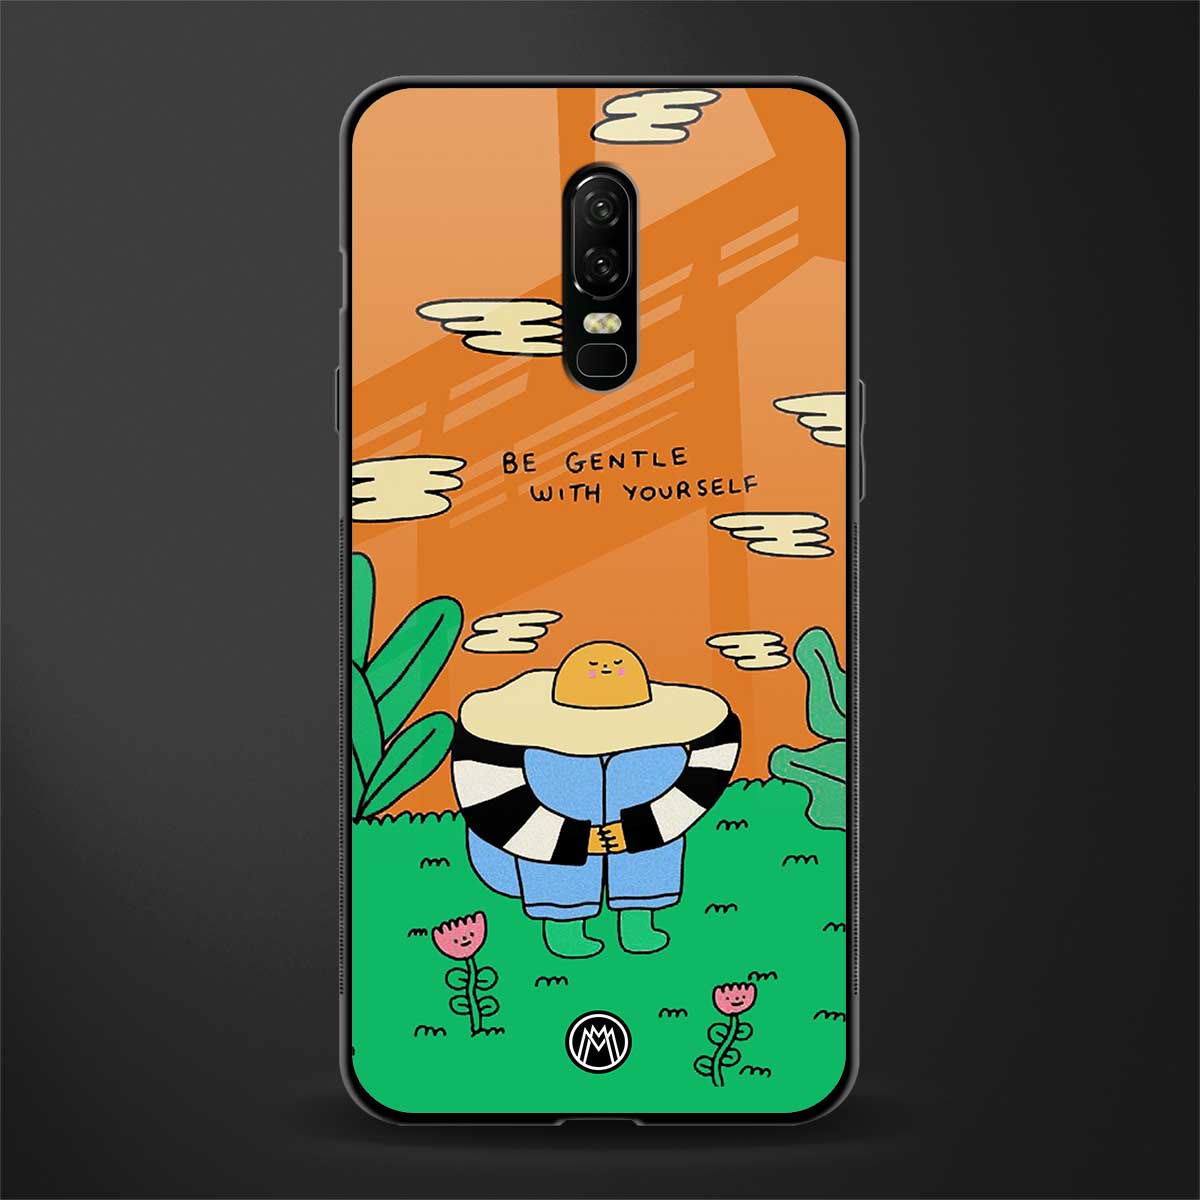 be gentle with yourself glass case for oneplus 6 image